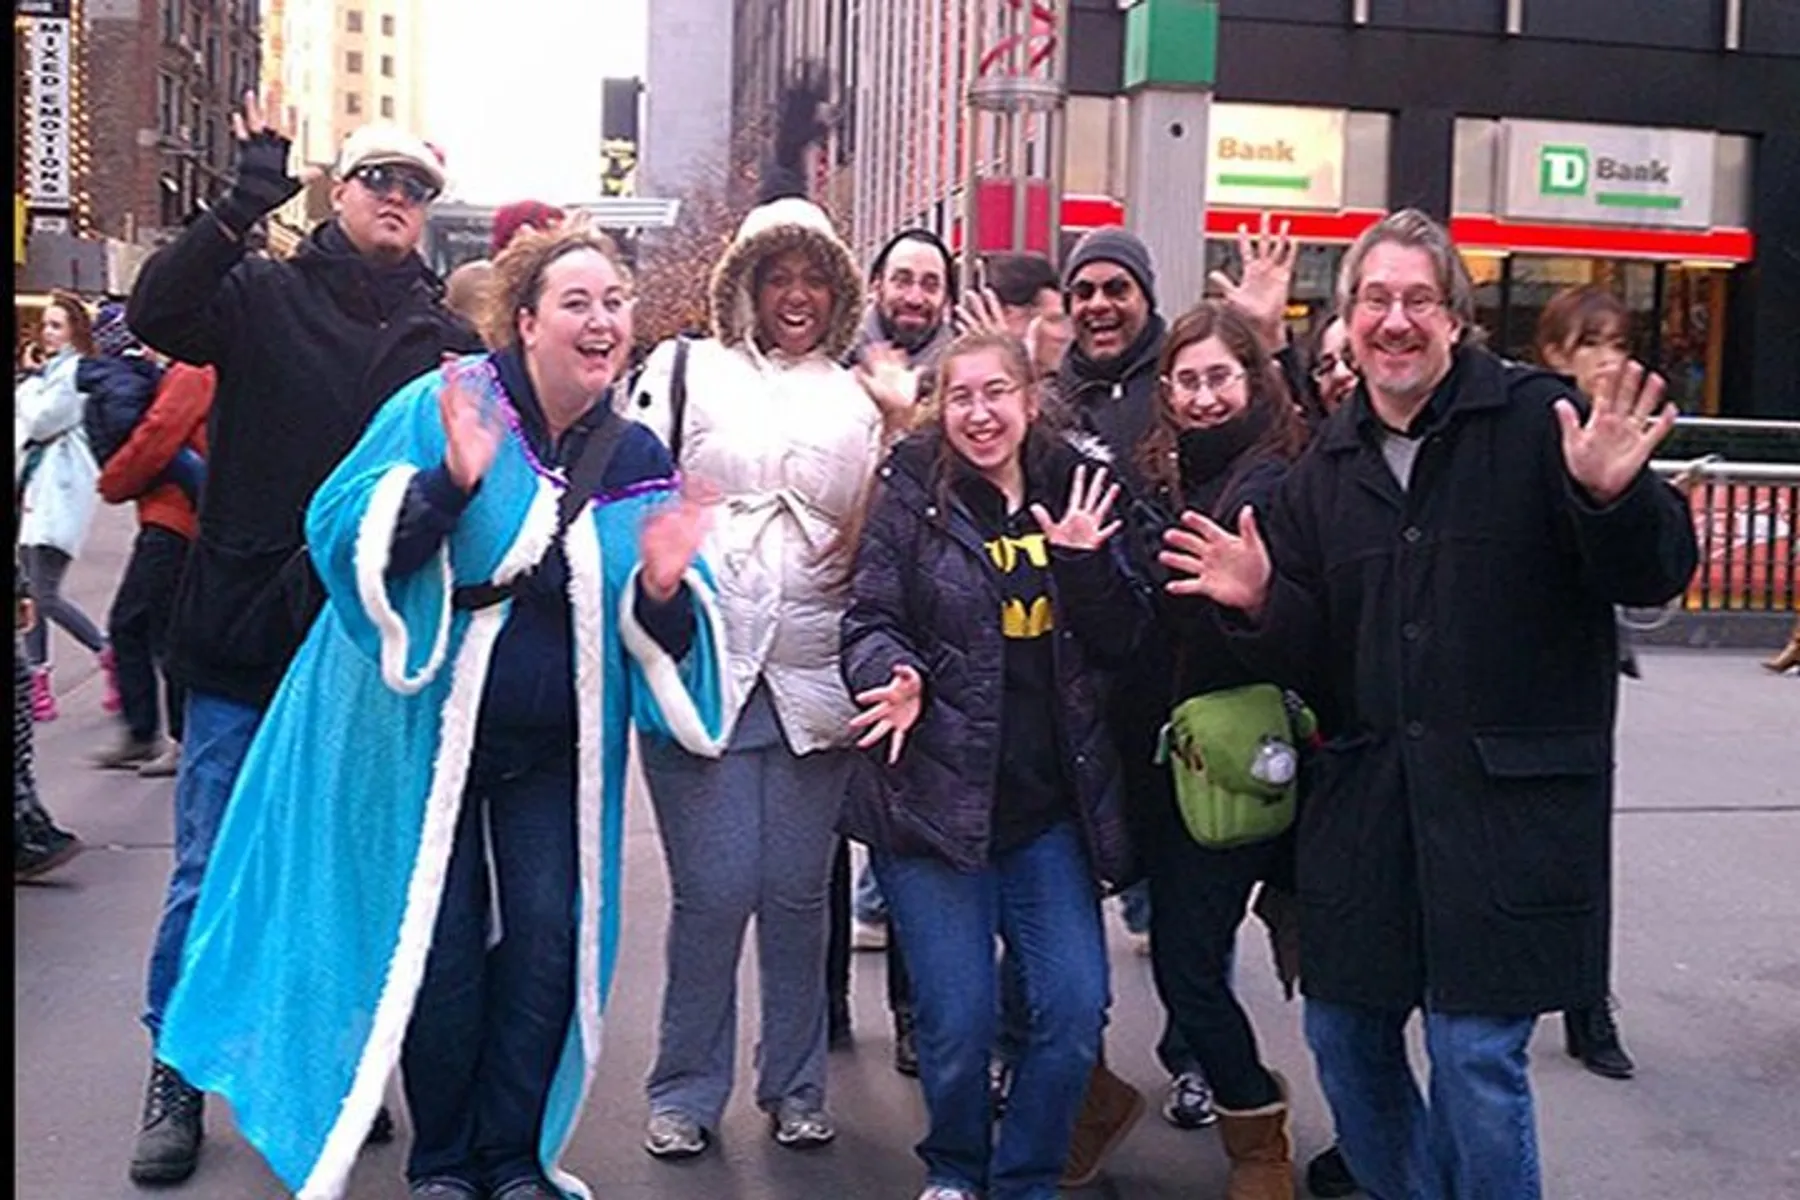 A group of cheerful people posing for a photo on a busy city sidewalk, with some raising their hands or making gestures to the camera.